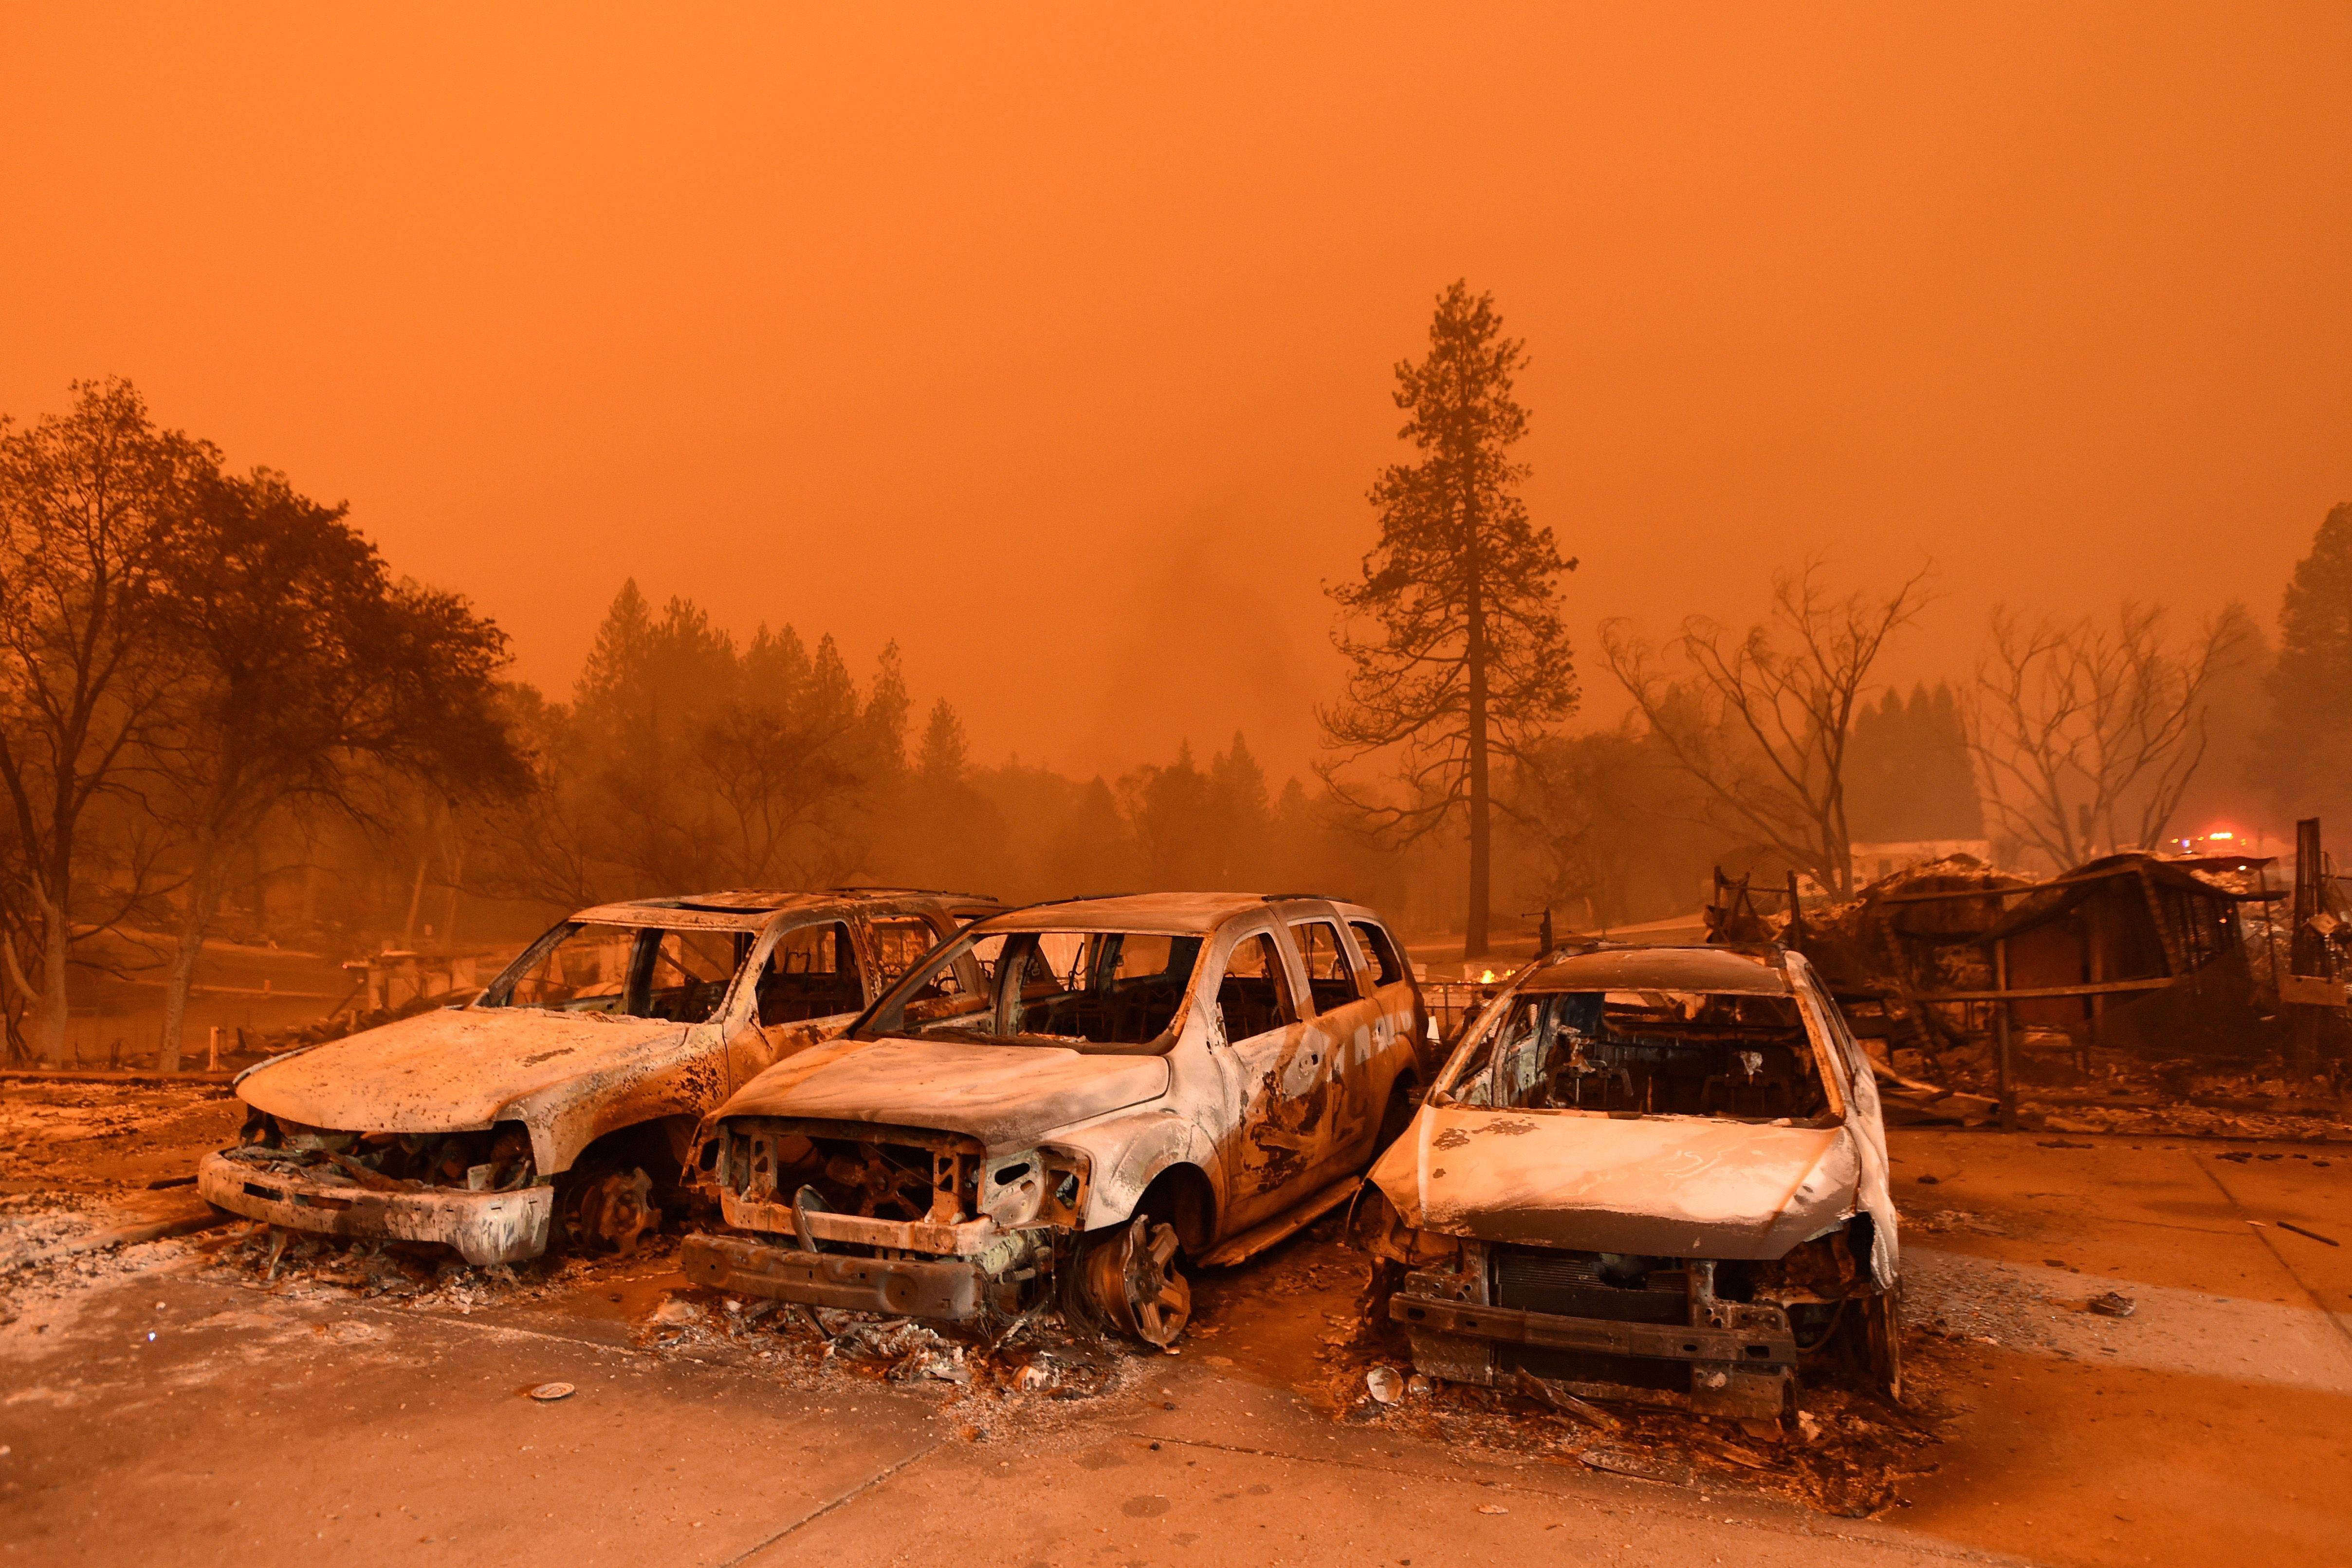 Burned vehicles in a parking lot engulfed in a smoky haze.